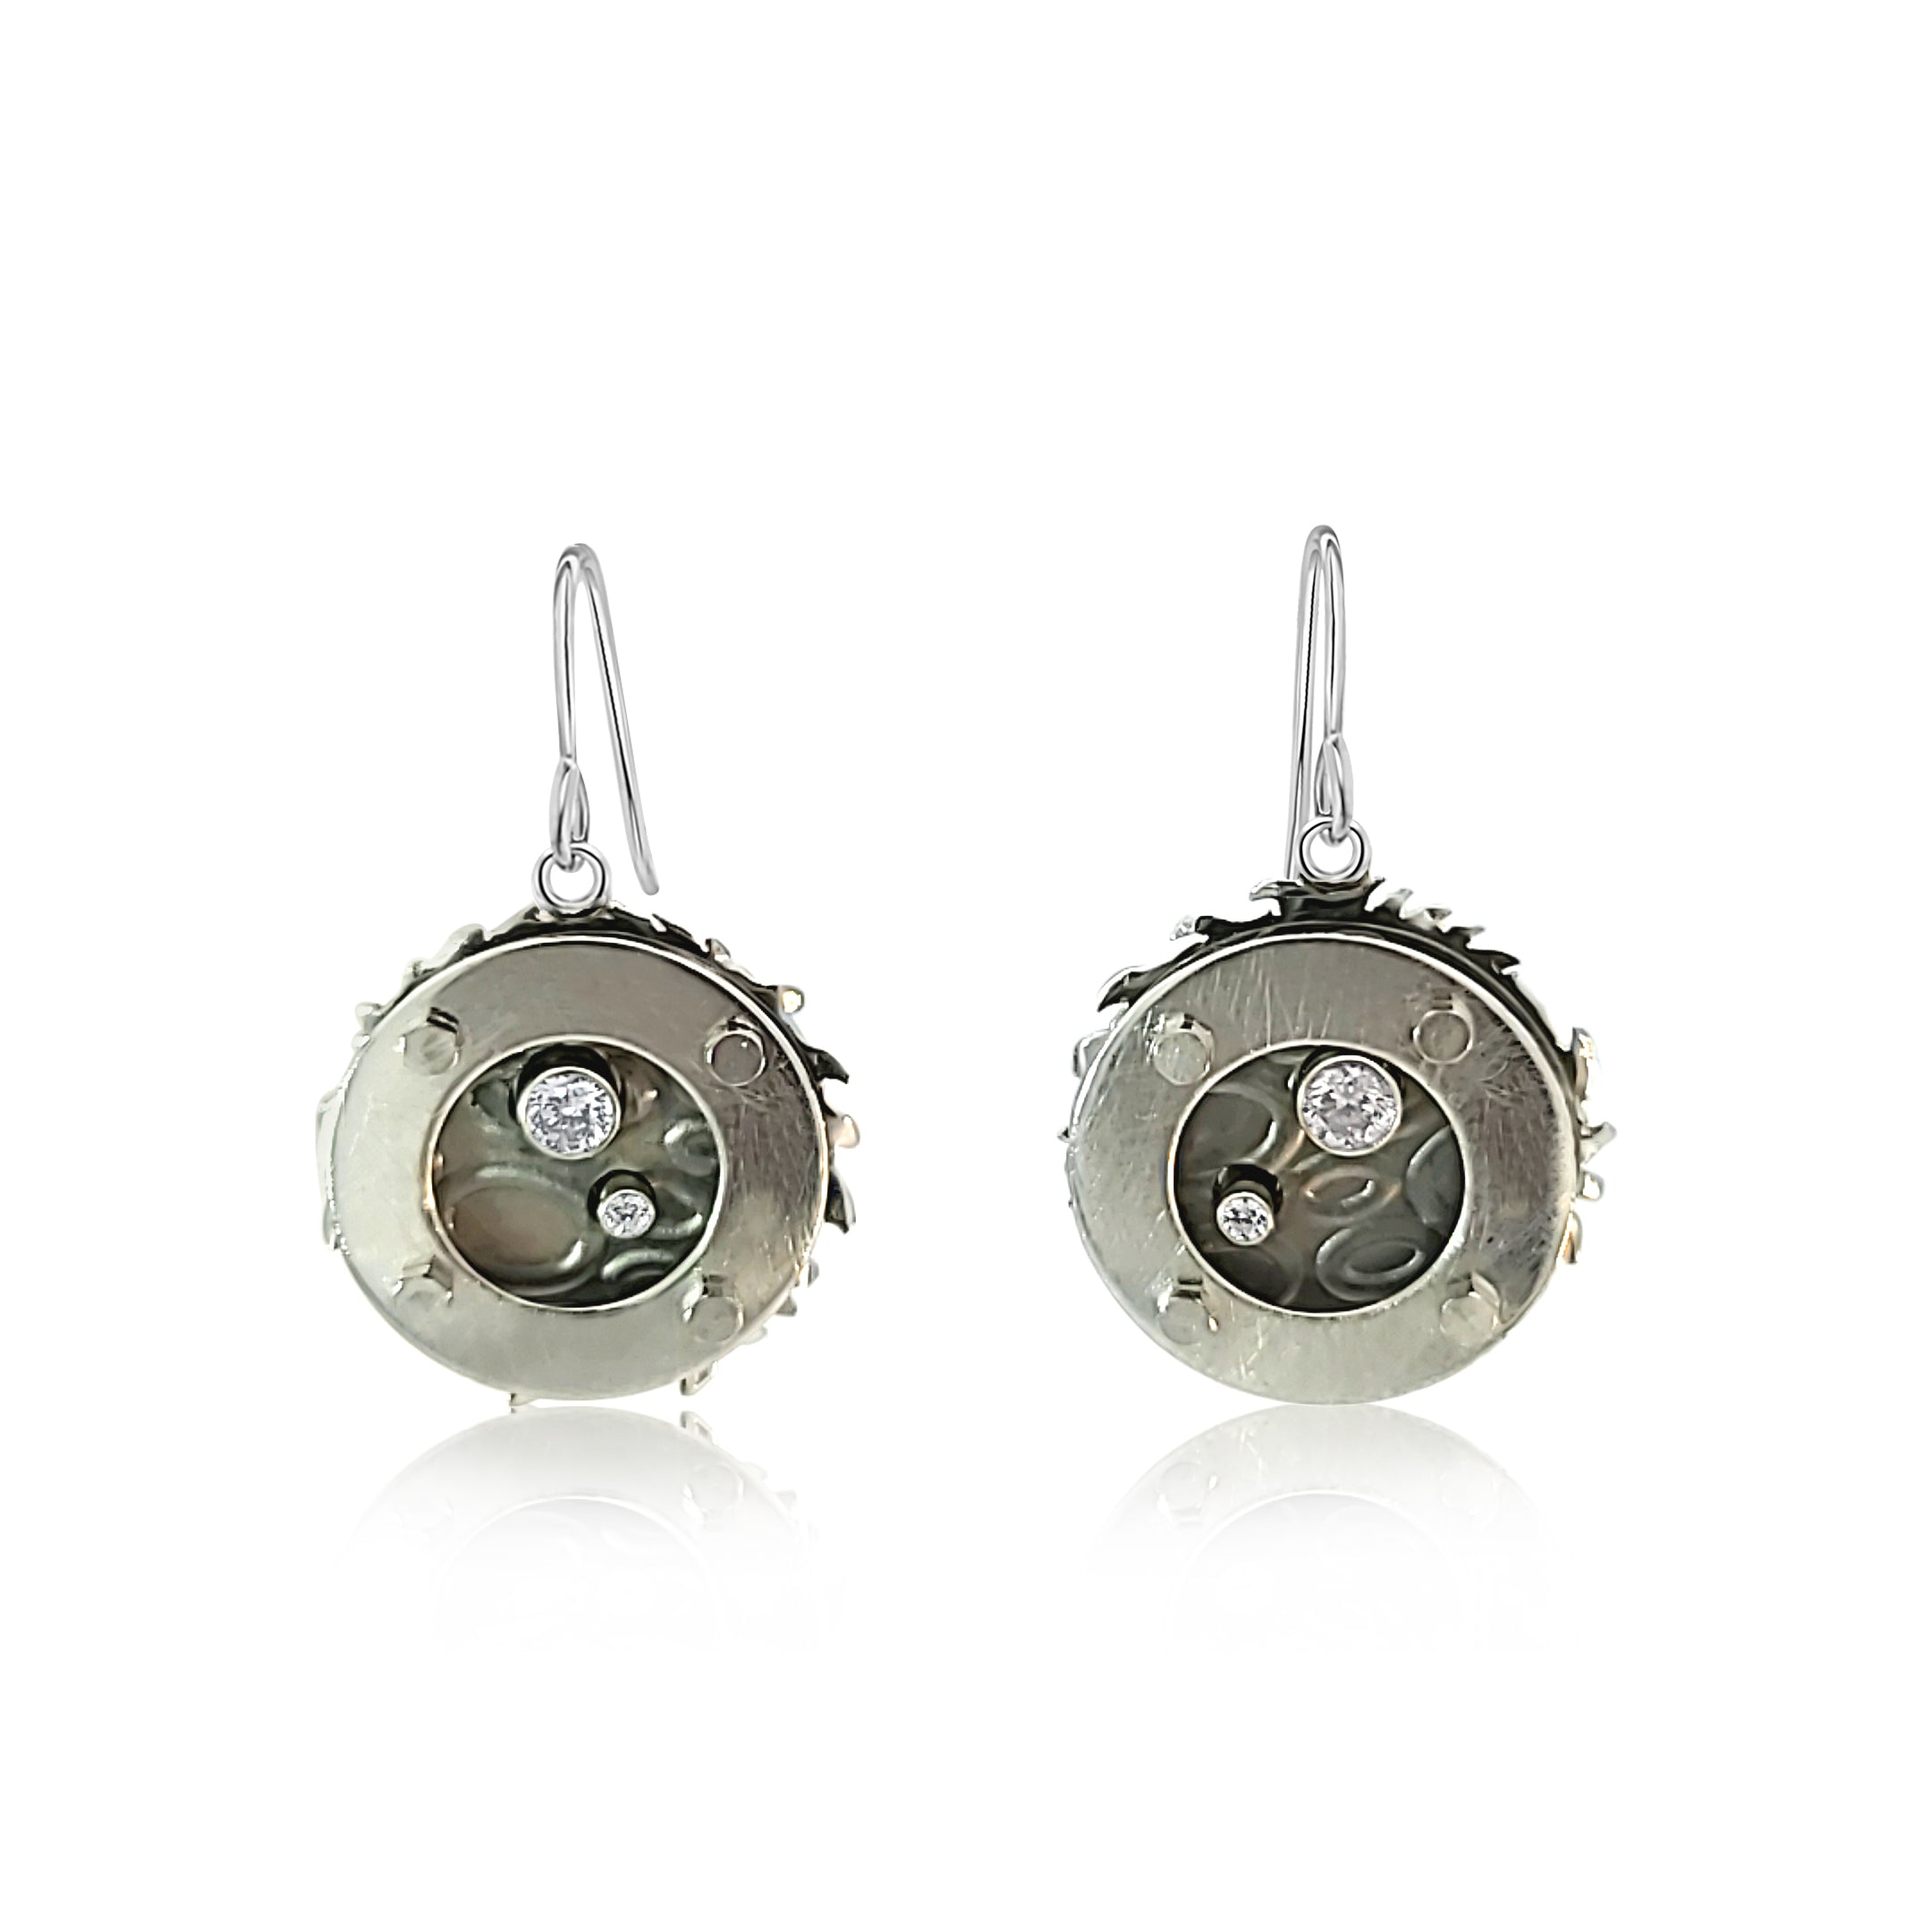 Sterling Silver, Niobium and Cubic Zirconia Earrings